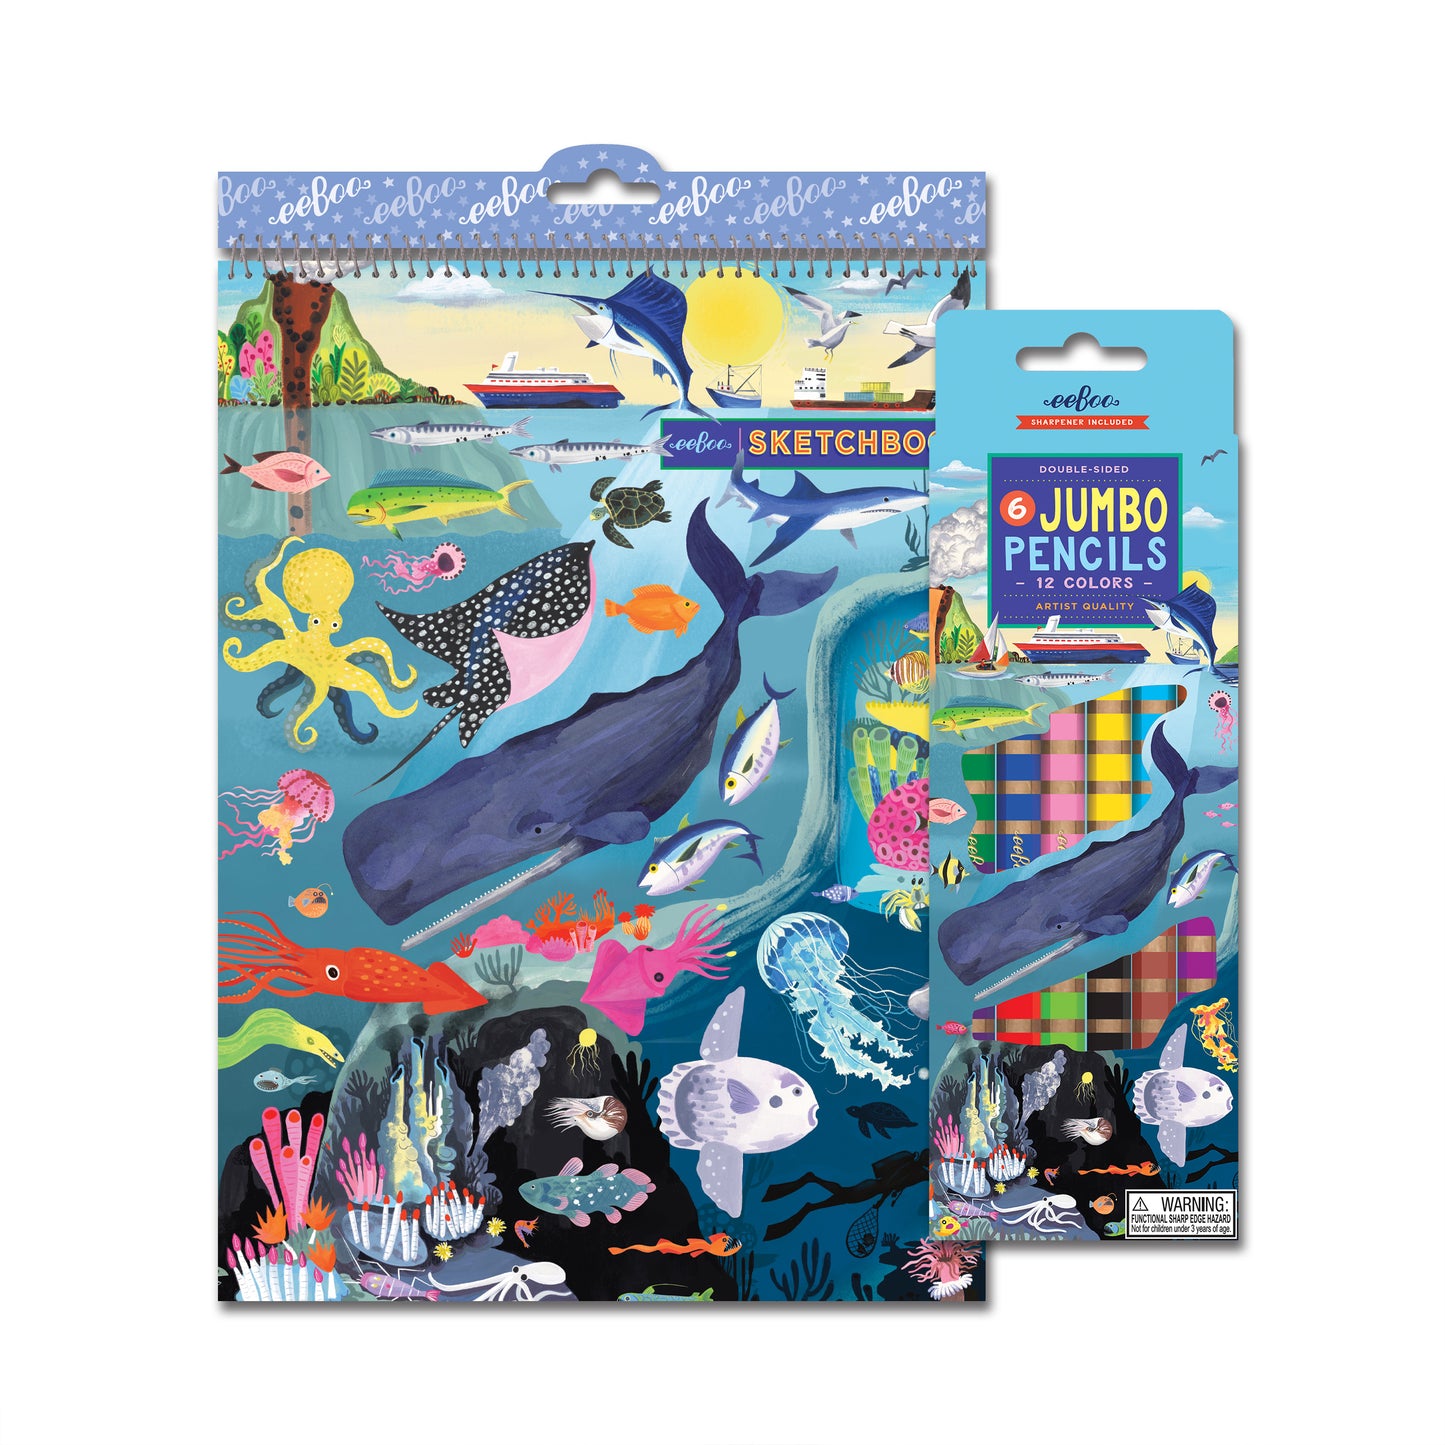  Under the Sea 6 Jumbo Double-Sided Color Pencils eeBoo Unique Gifts